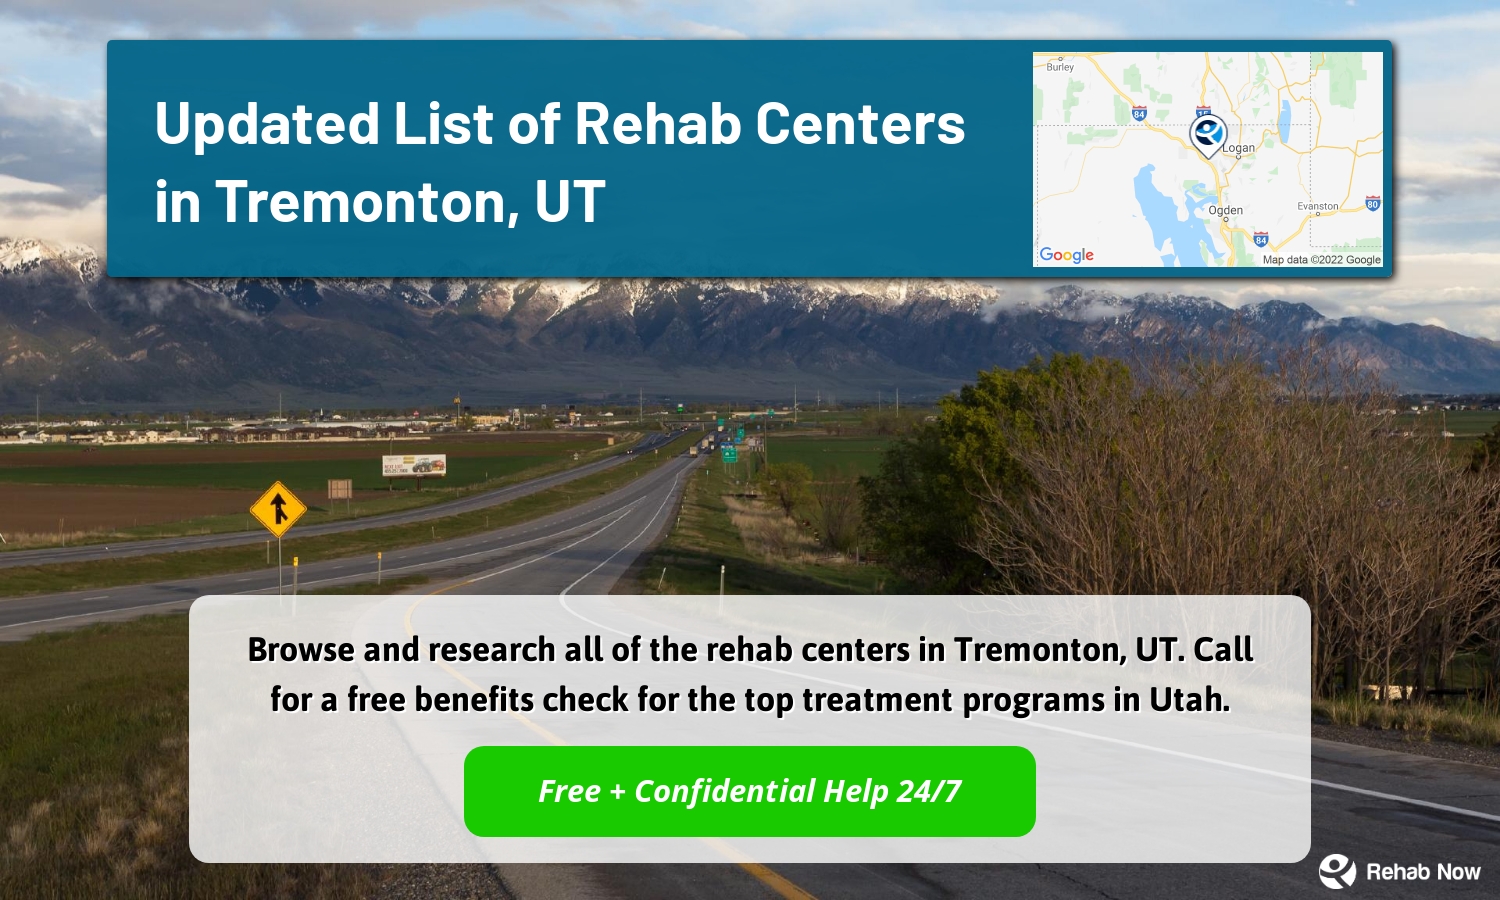 Browse and research all of the rehab centers in Tremonton, UT. Call for a free benefits check for the top treatment programs in Utah.